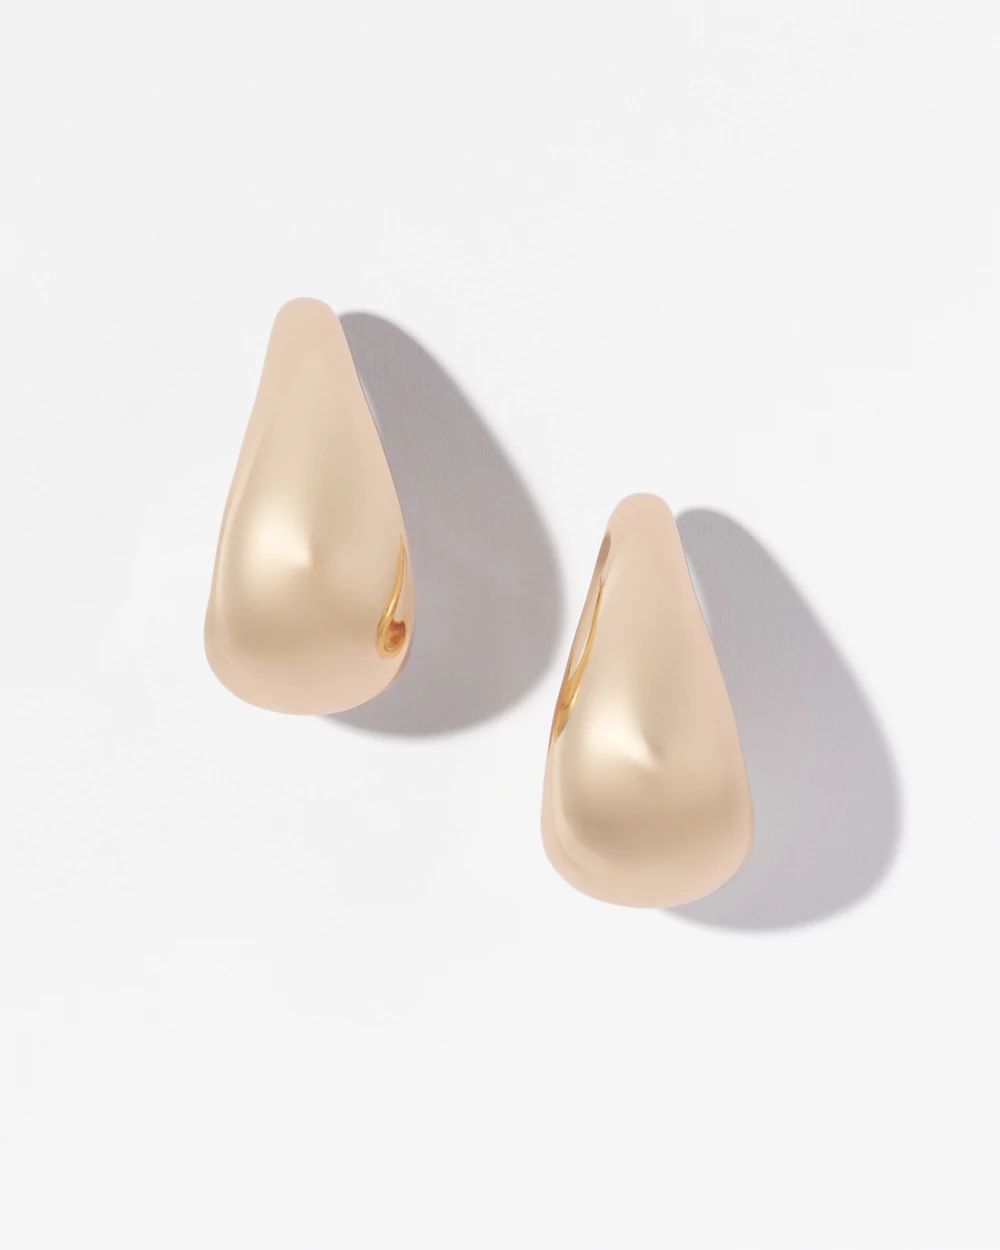 Large Gold Teardrop Earrings click to view larger image.